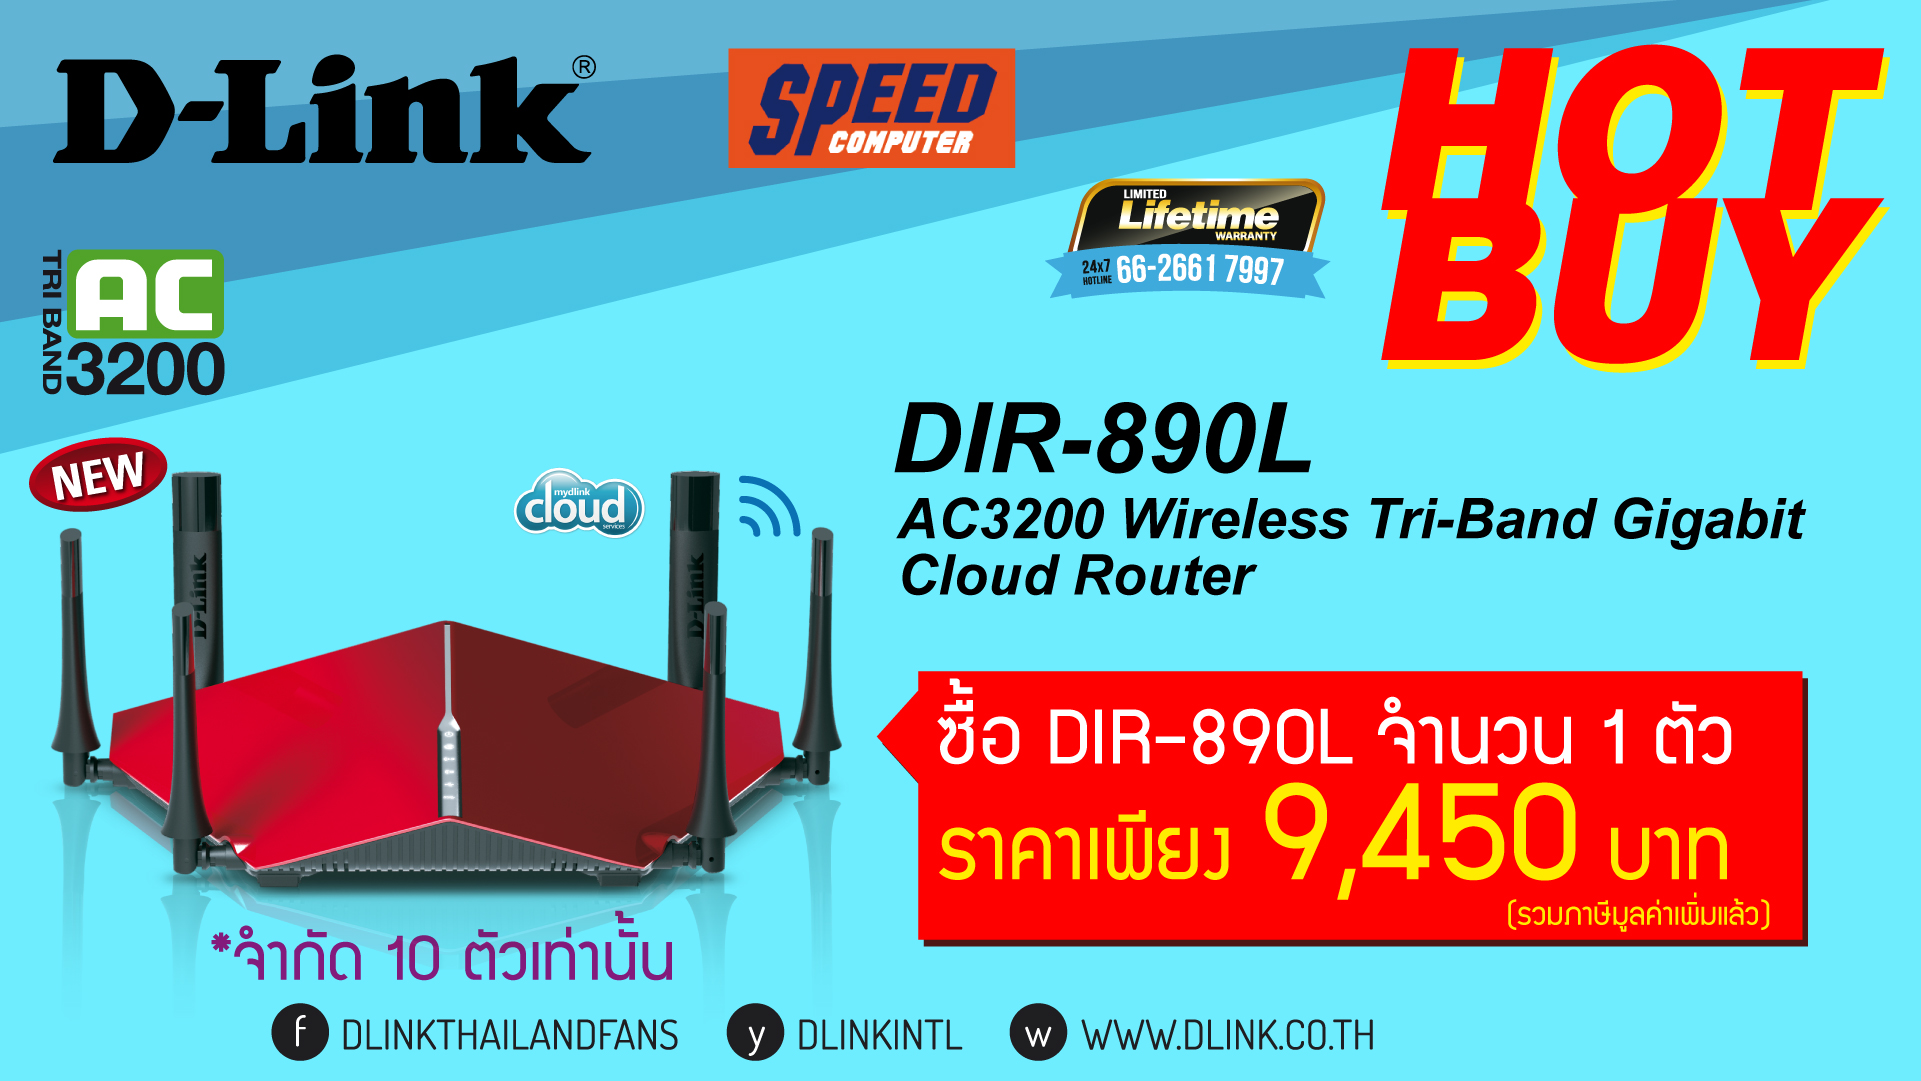 D-Link-Commart-Screen-for-Speed-March-16-07